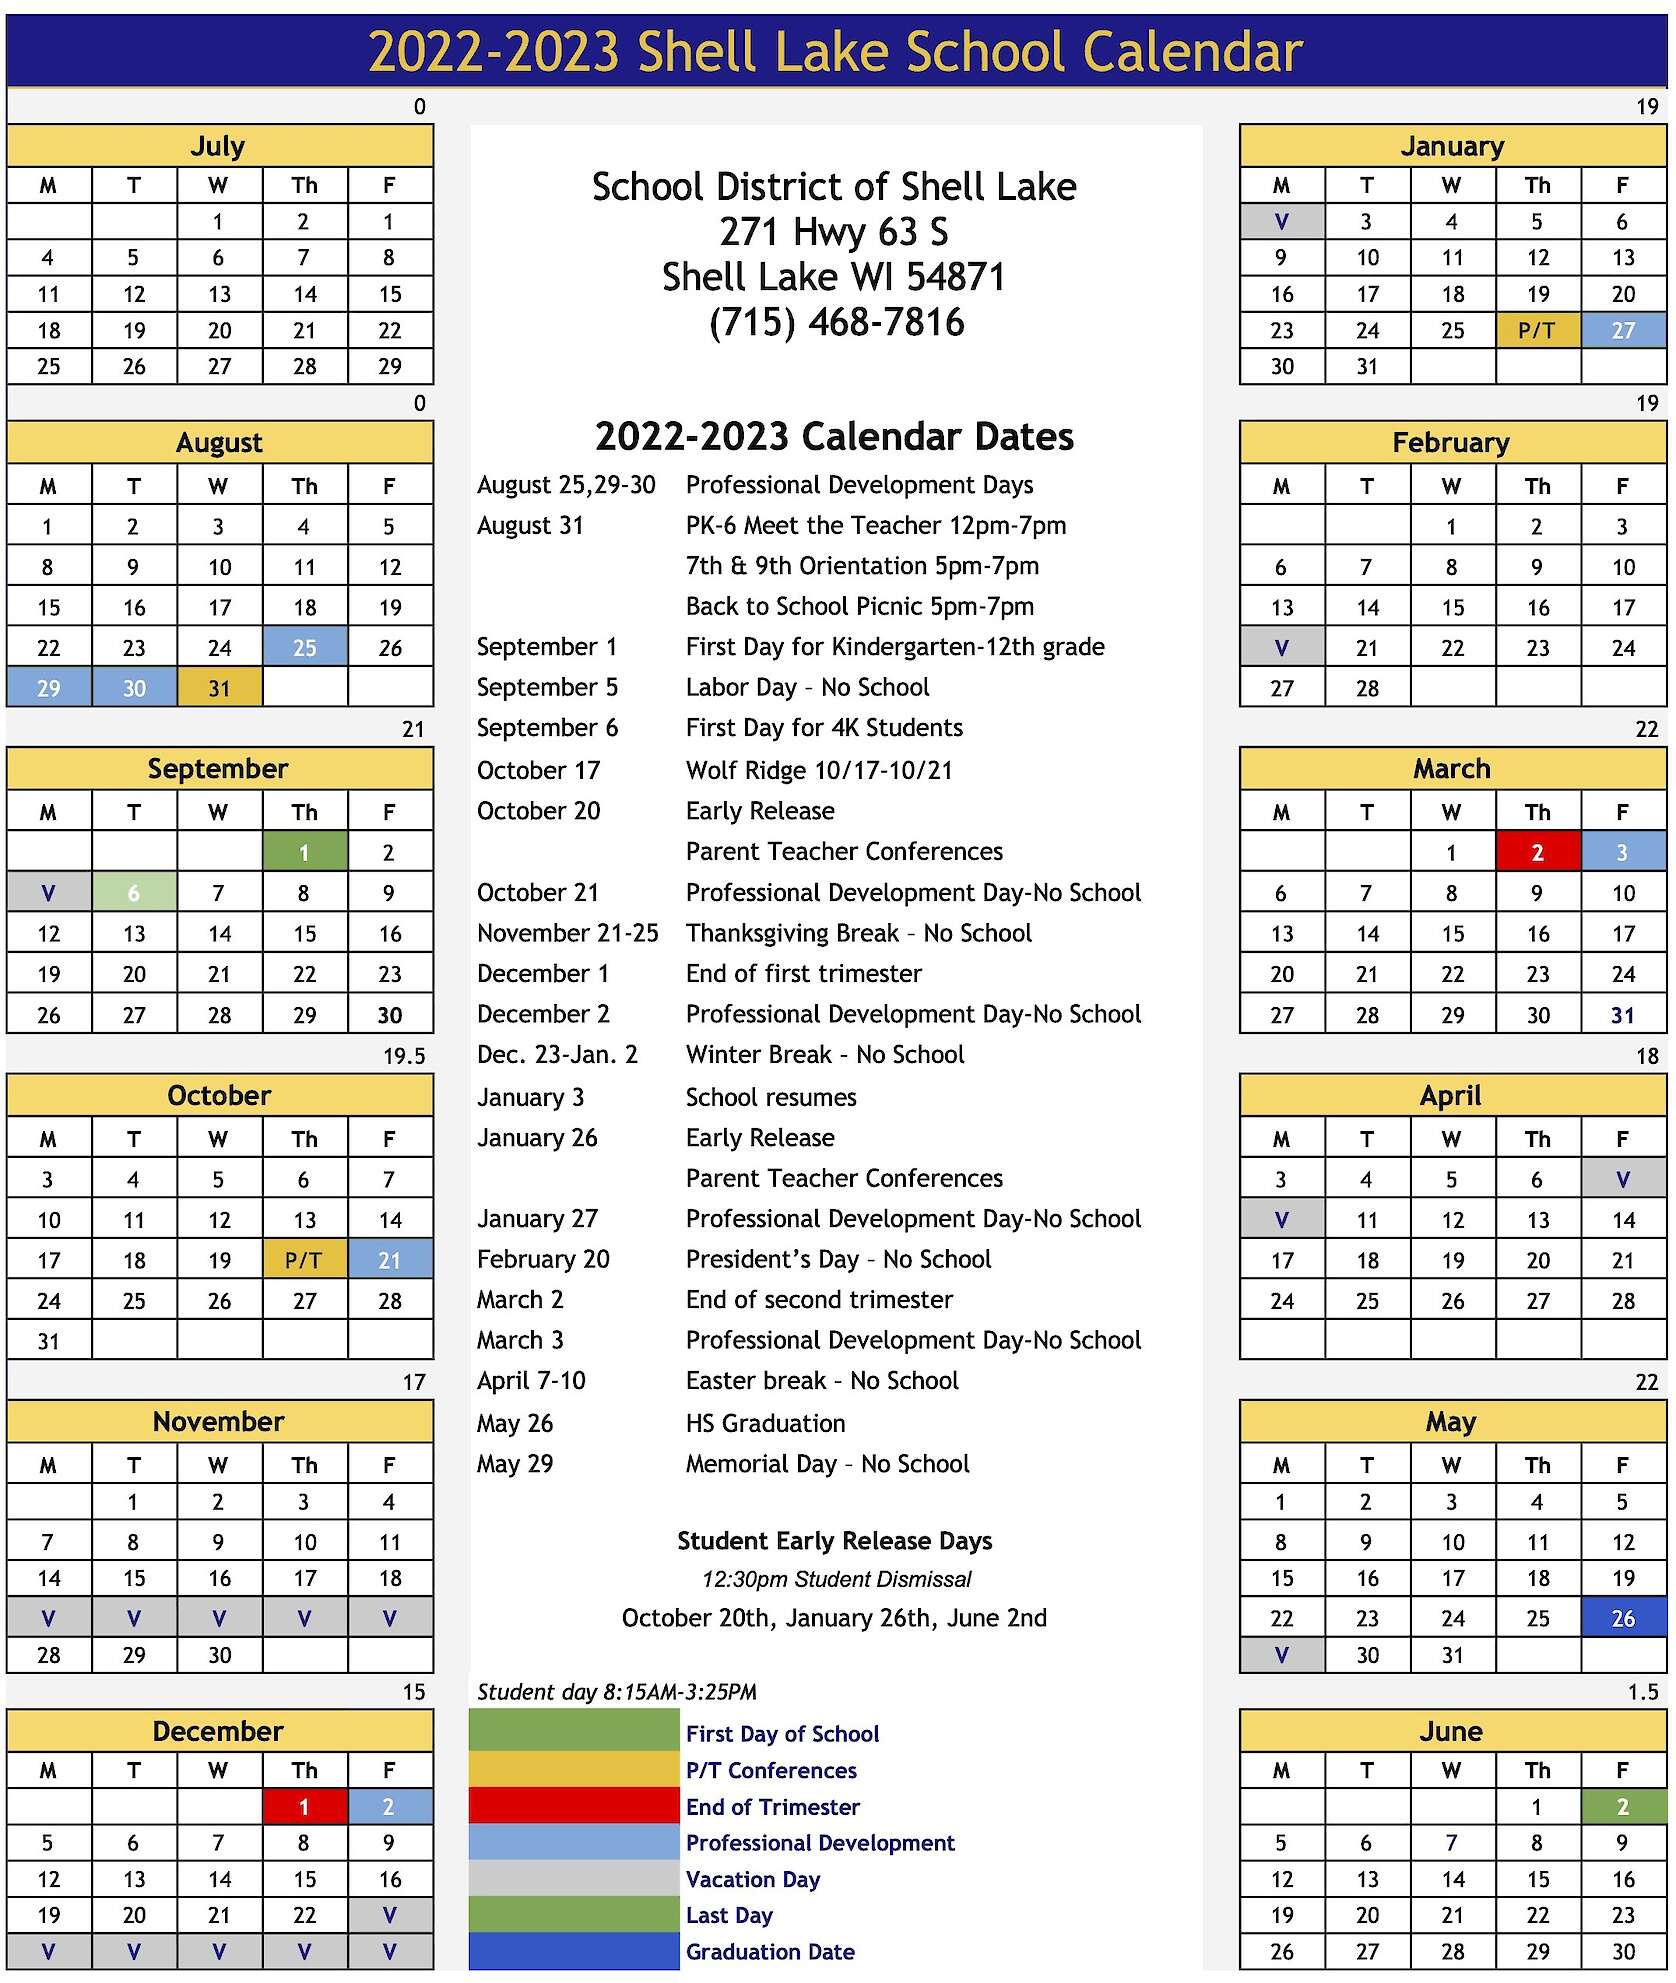 2022 2023 School Calendar Included In This Week s Shell Lake Laker News